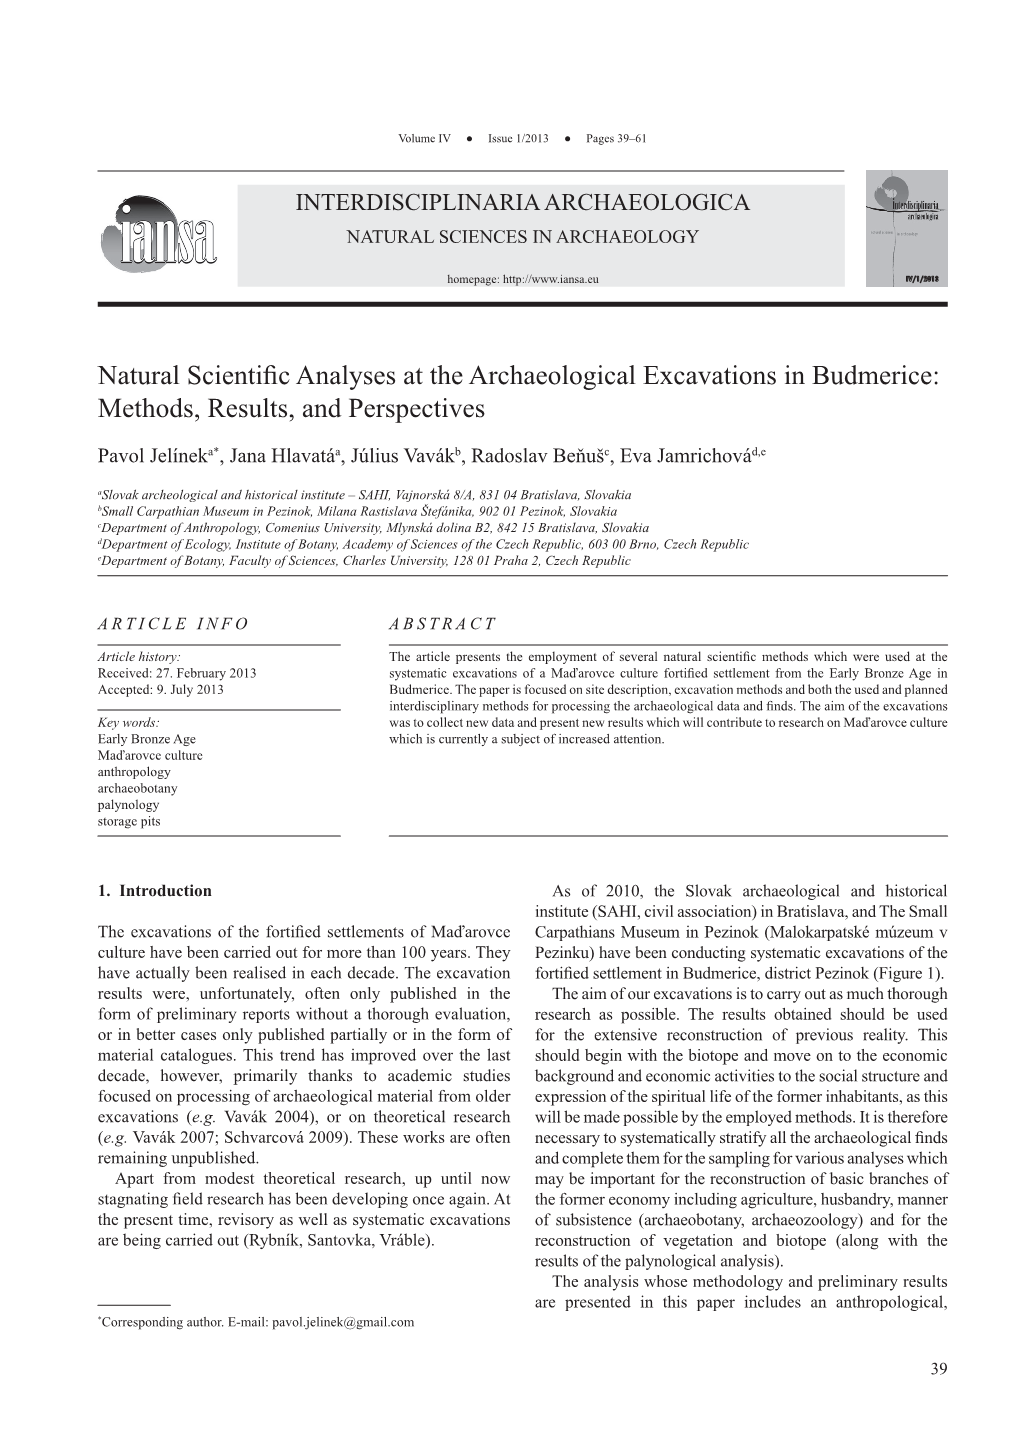 Natural Scientific Analyses at the Archaeological Excavations in Budmerice: Methods, Results, and Perspectives